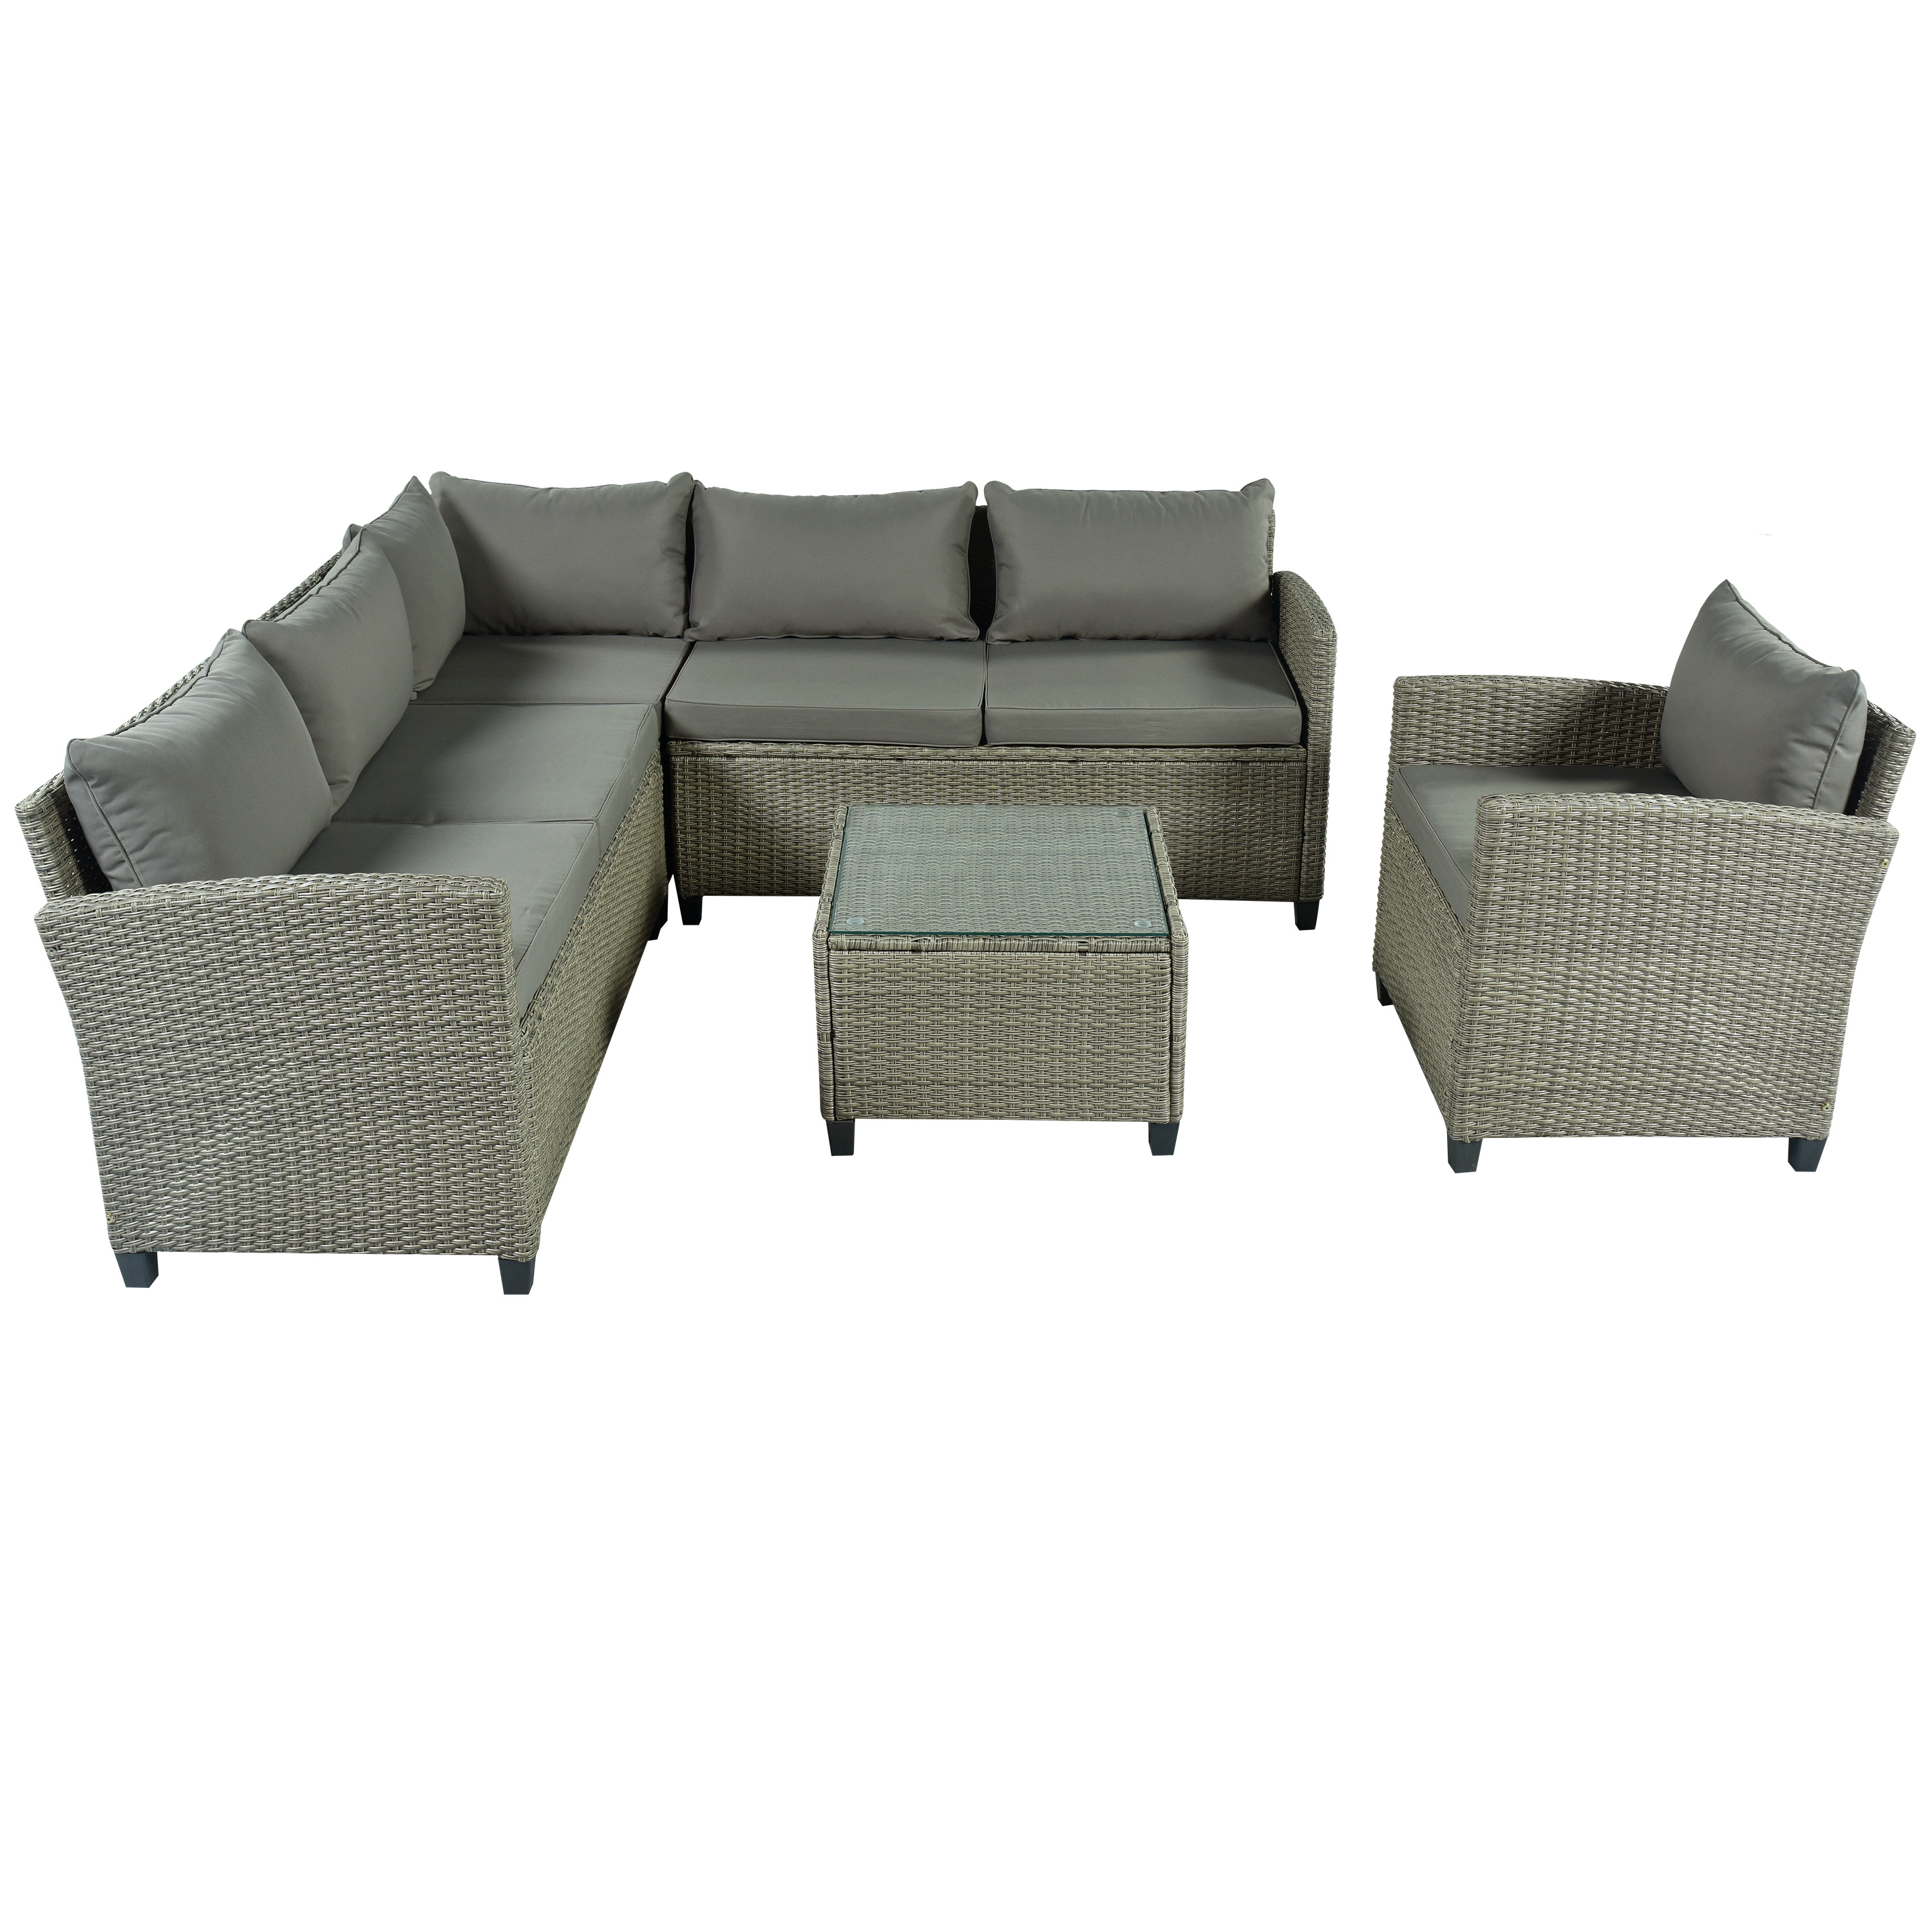 Garden Patio Conversation Set, BTMWAY 5 Piece Outdoor Sectional Sofa Couch Patio Furniture Sets with Glass Table, Cushions and Single Chair, PE Wicker Patio Sofa Sets for Garden Backyard Poolside Lawn - image 2 of 9